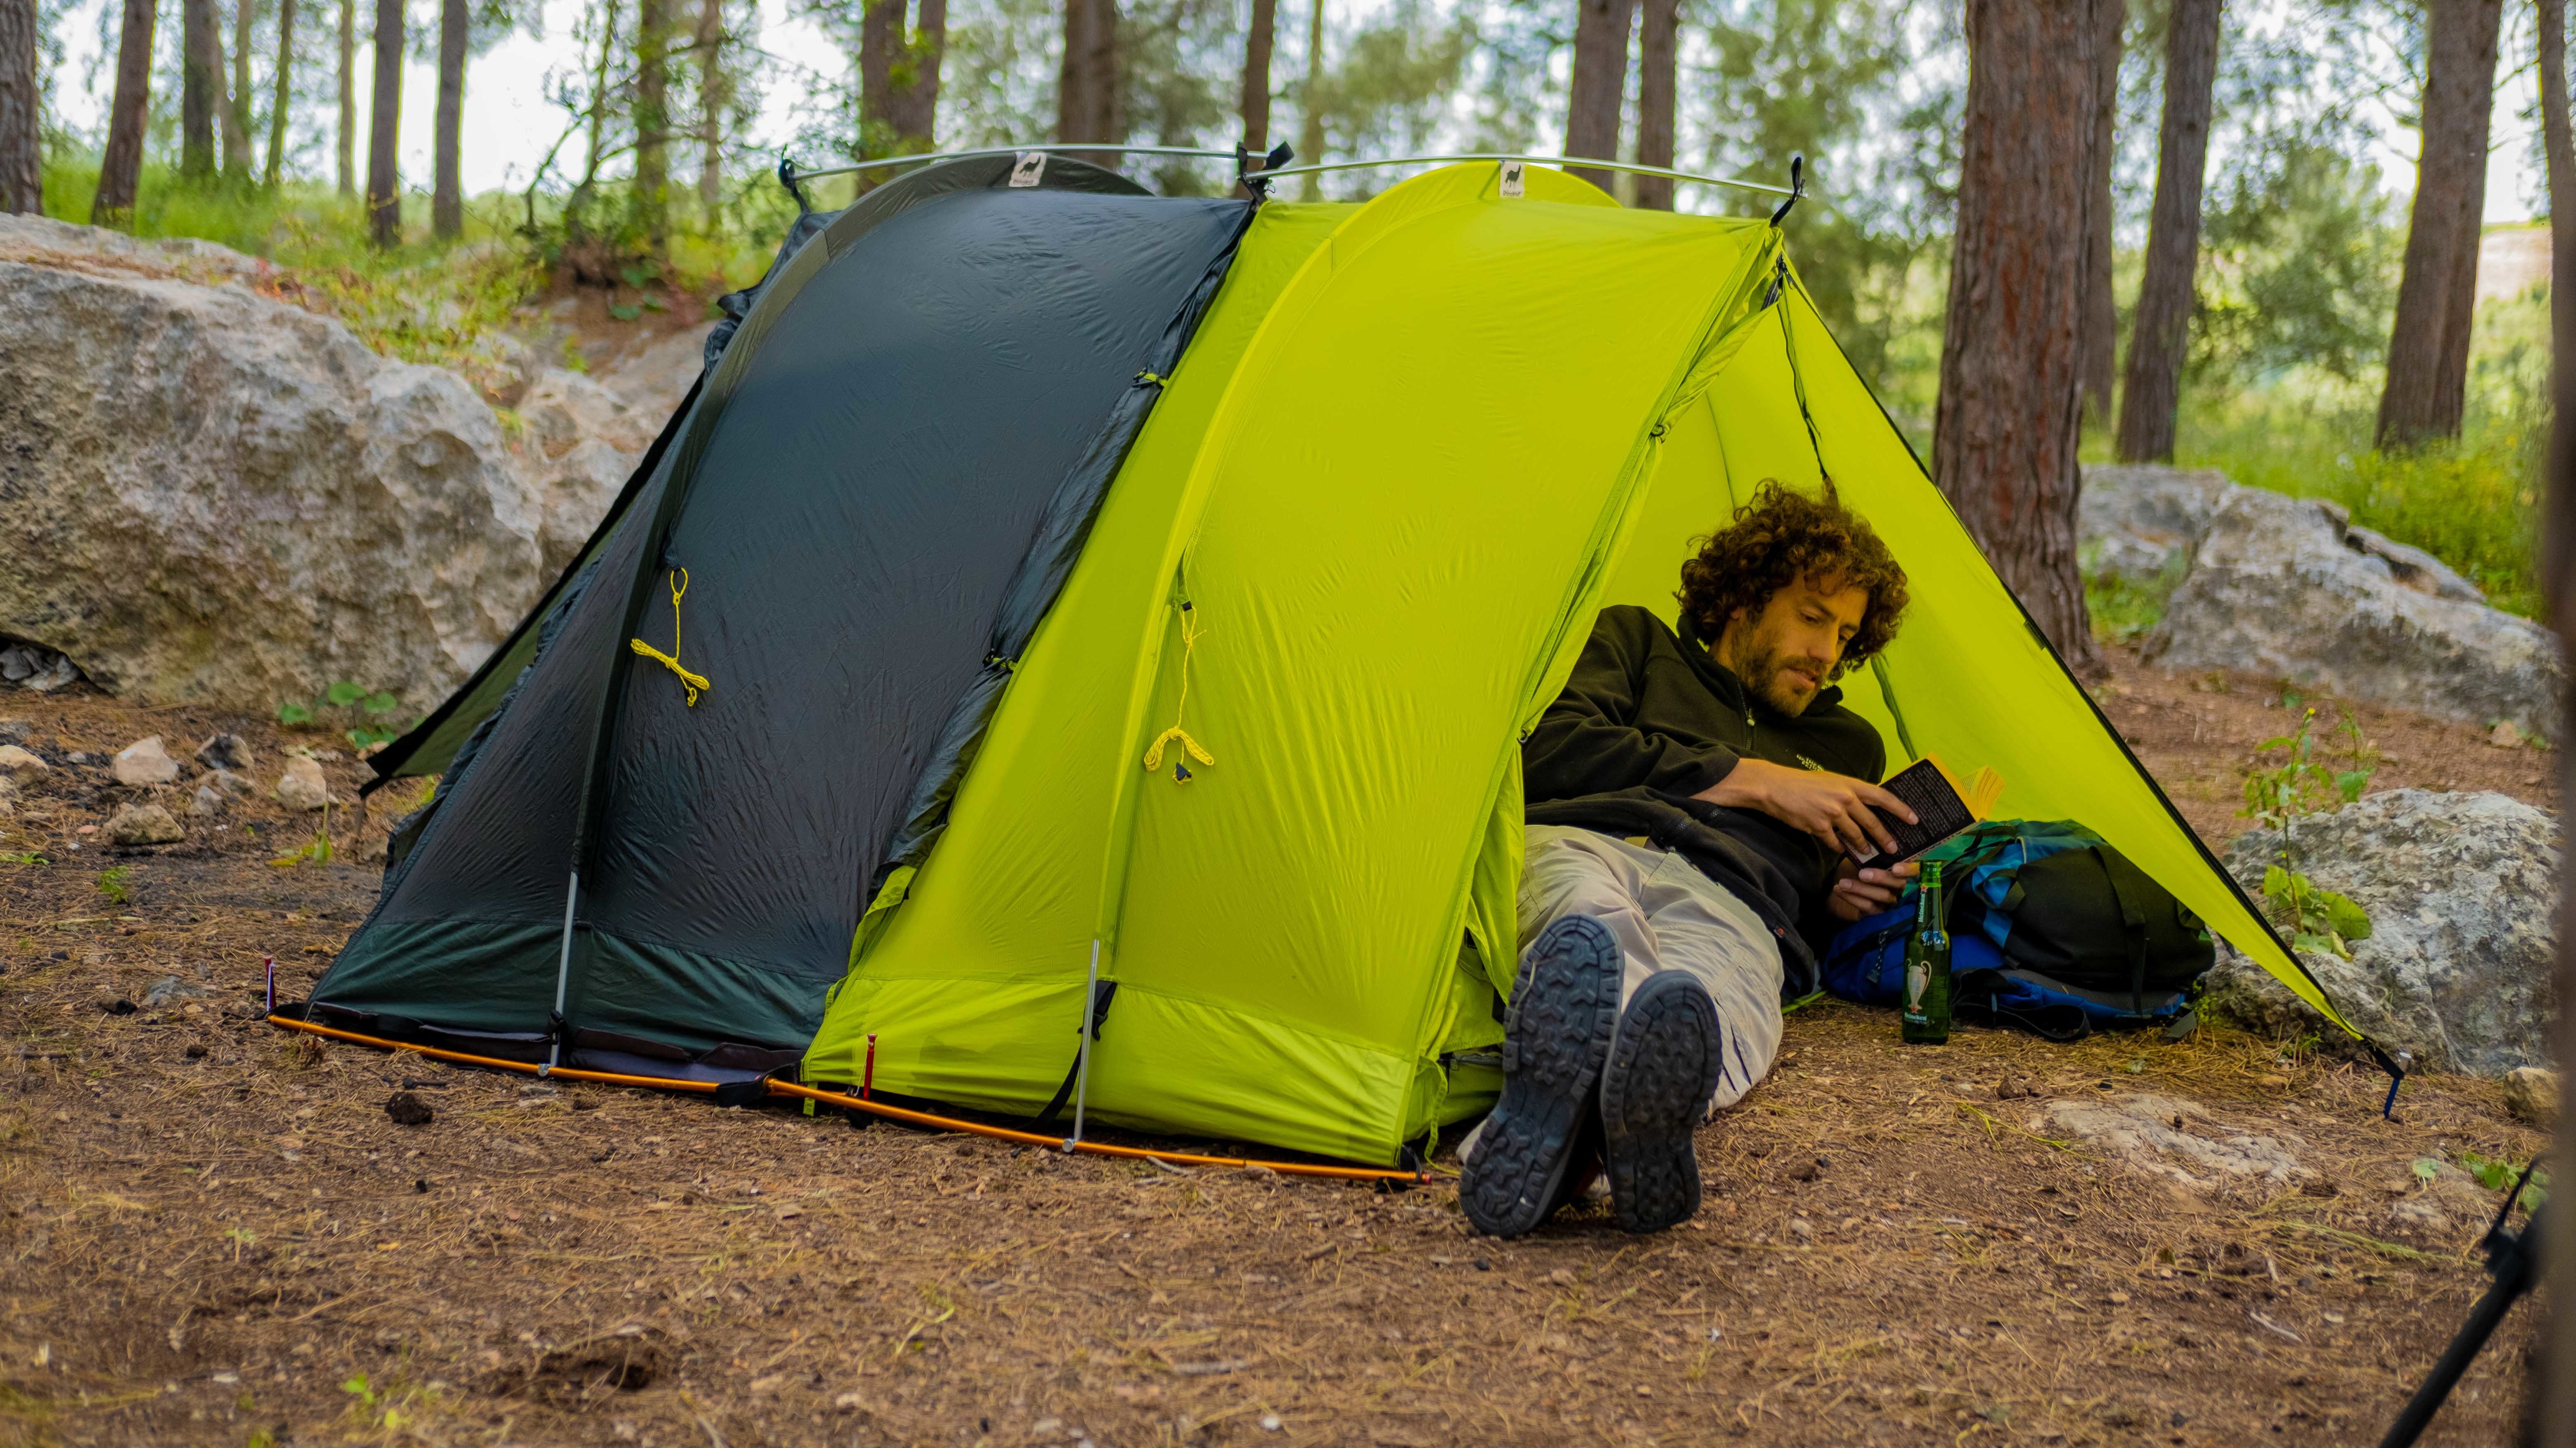 Make Camping Easier With This AllInOne, BackpackSized SuperTent